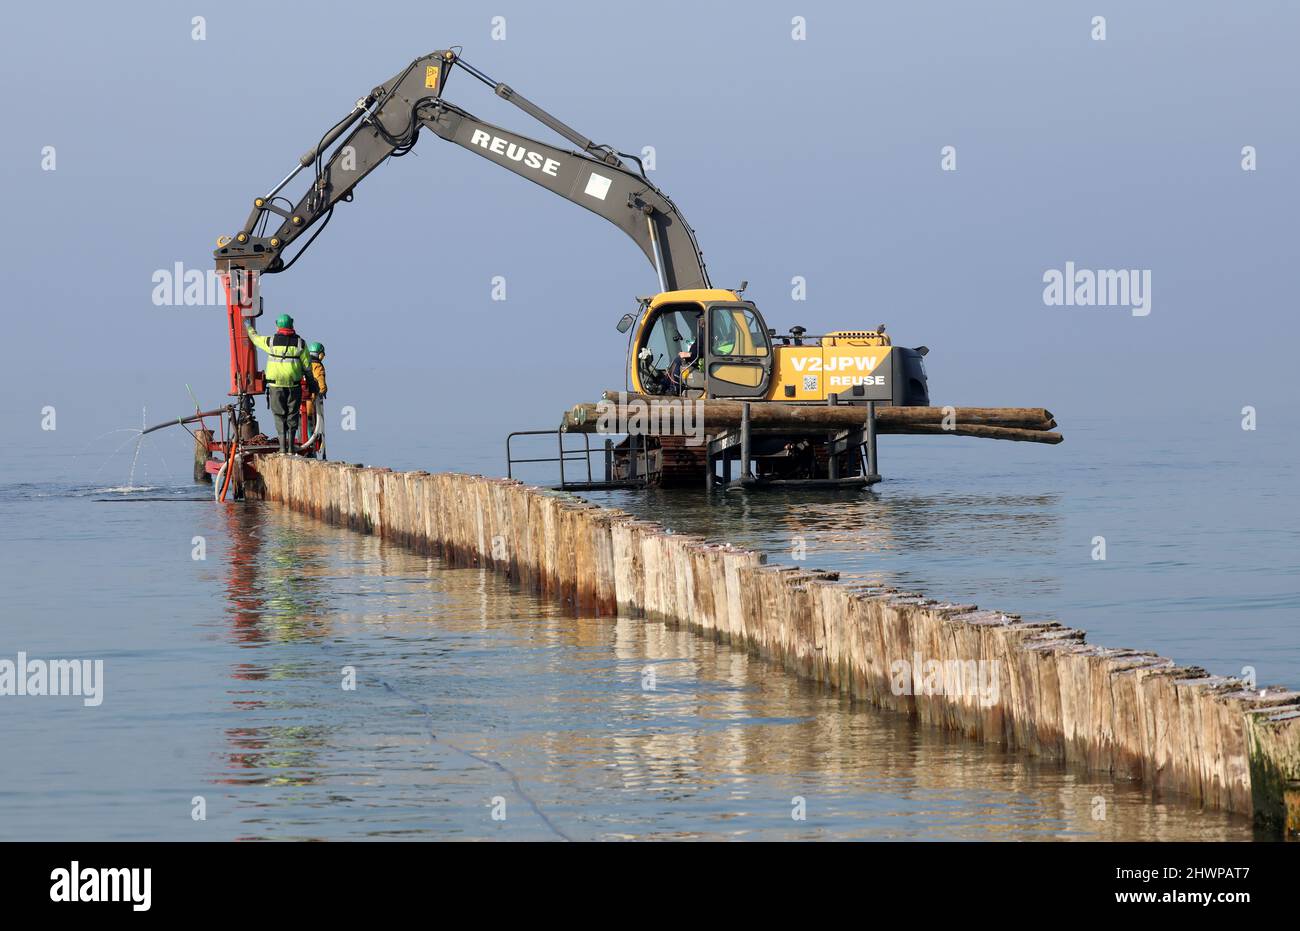 Wustrow, Germany. 02nd Mar, 2022. Destroyed by the ship's borer (Teredo navalis) are old groyne logs stored behind the dike of the Baltic resort of Wustrow. The replacement of the 21 groynes costs 1.9 million euros and will last from September 2021 to May 2022. The new groynes are to be built (on the seaward side) from certified tropical wood that can resist the ship borer. Credit: Bernd Wüstneck/dpa-Zentralbild/ZB/dpa/Alamy Live News Stock Photo